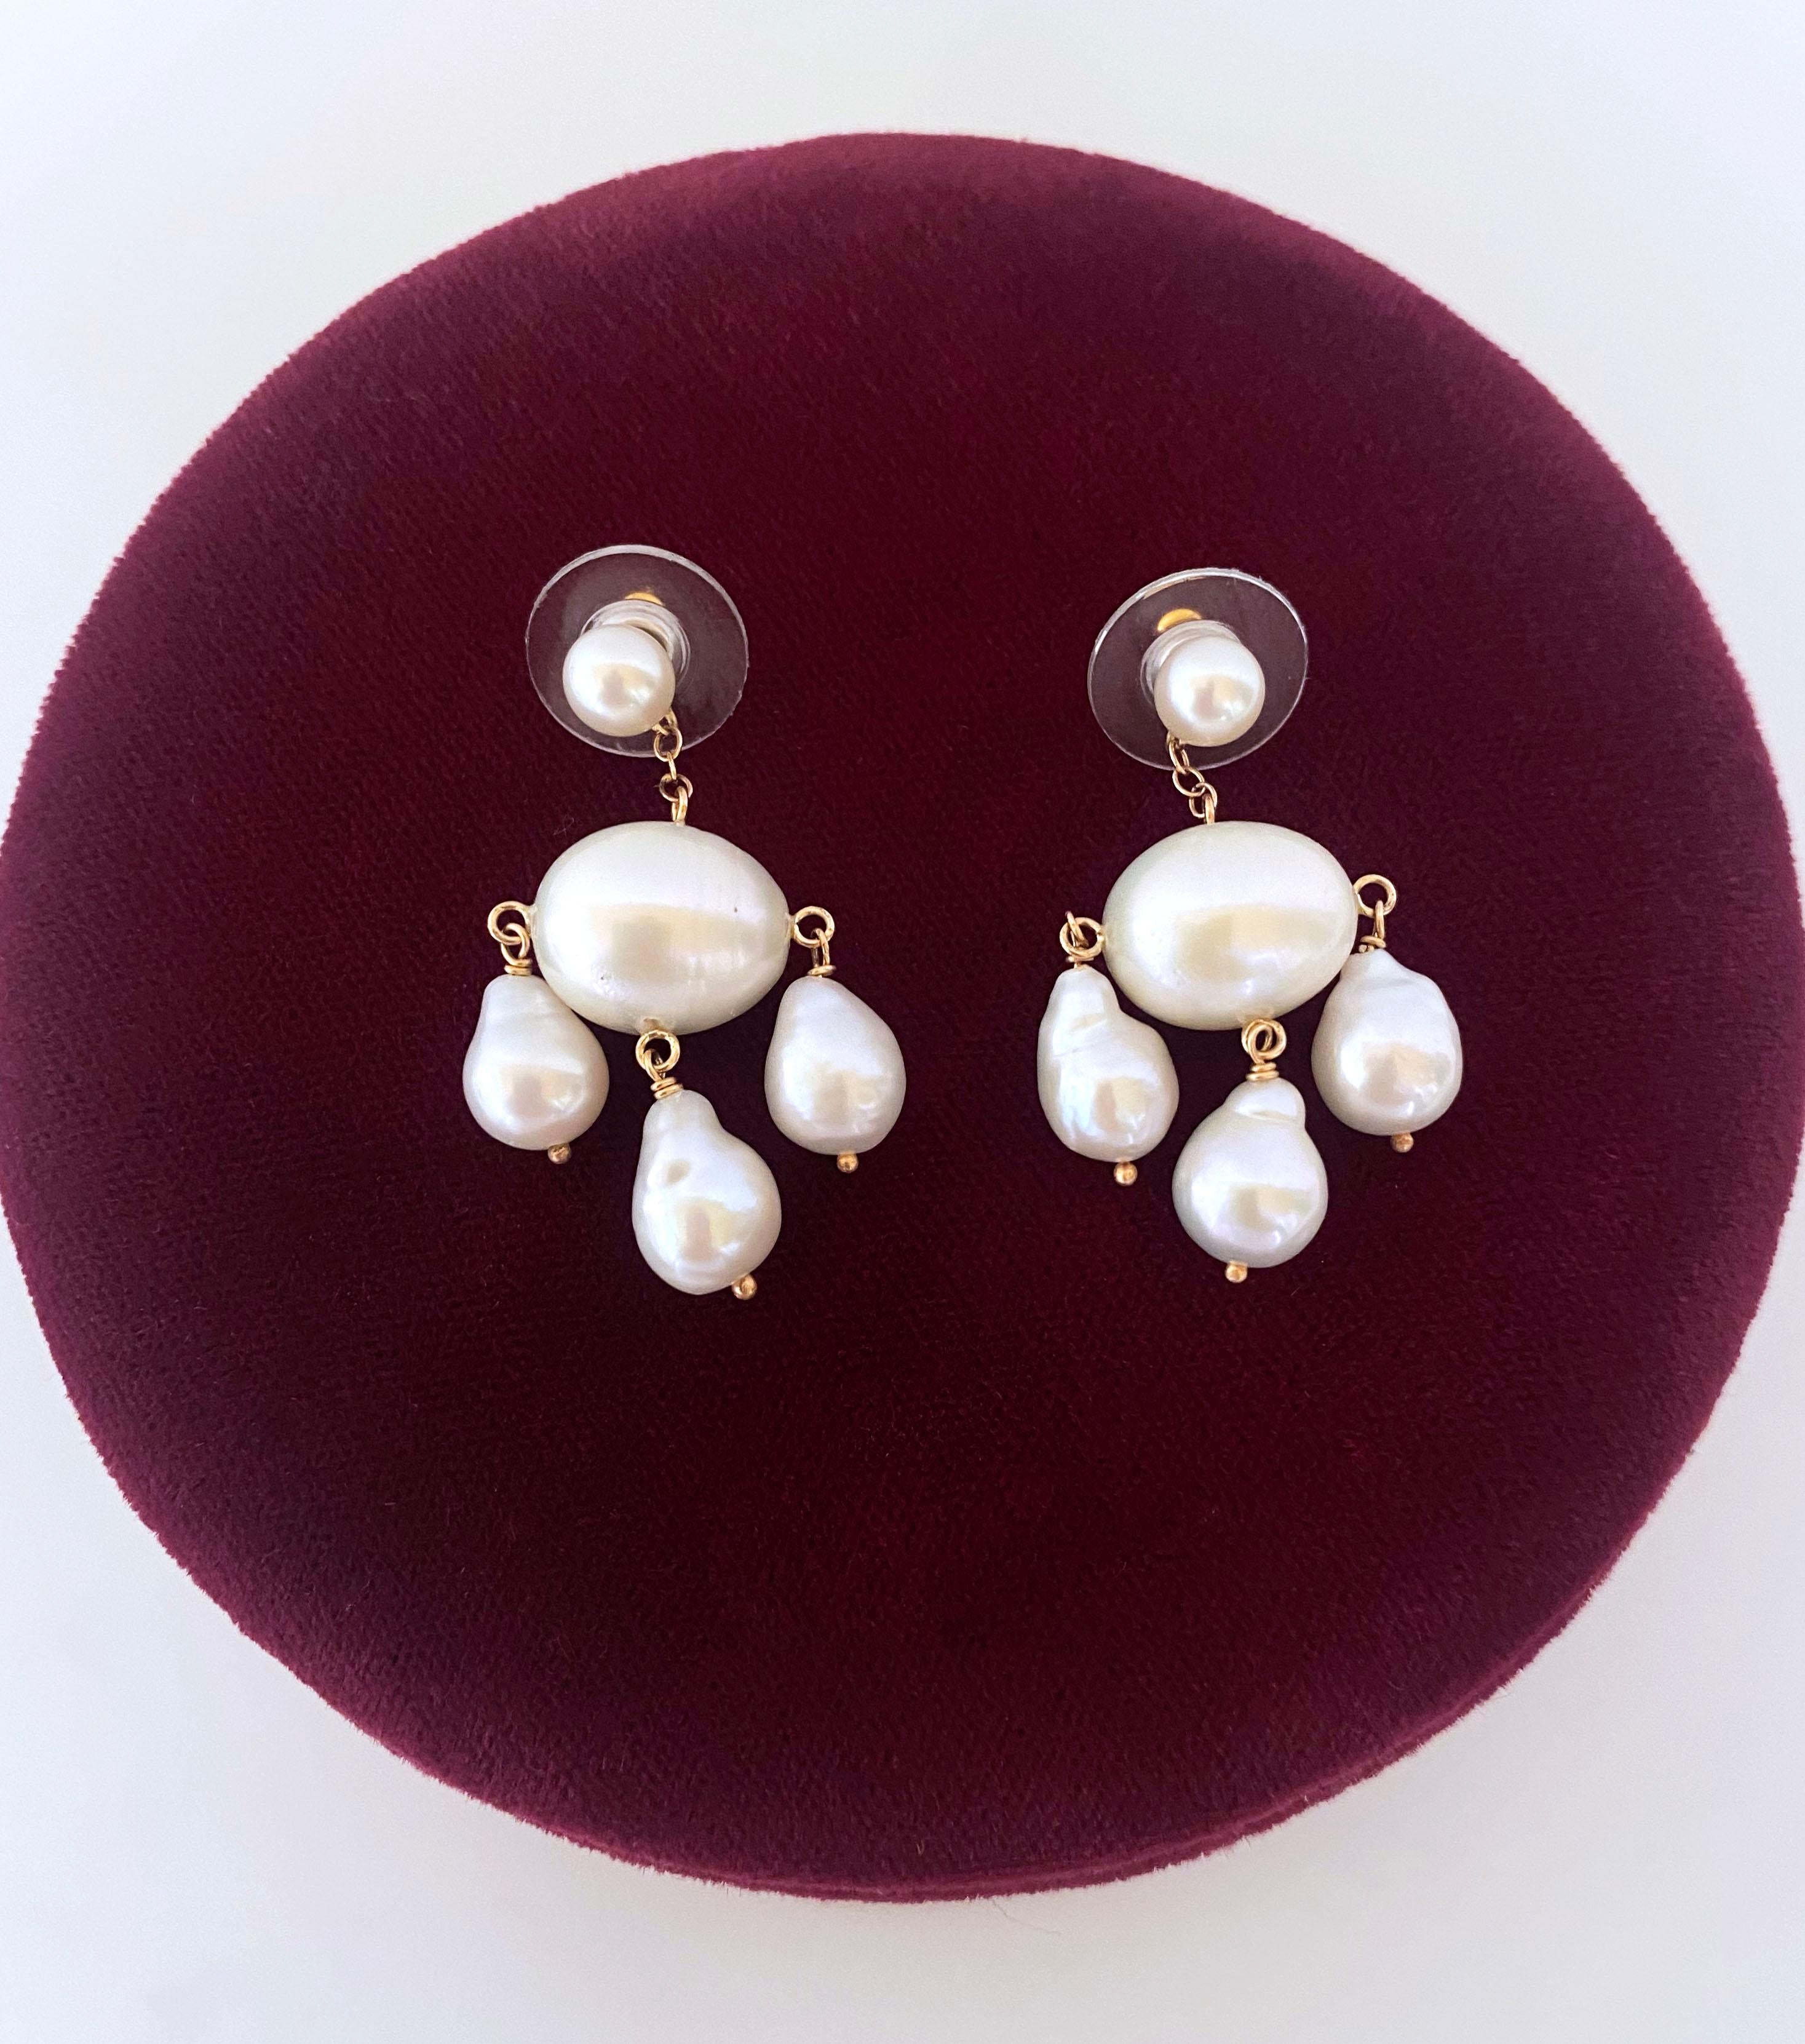 Artisan Marina J. Chandelier Baroque Pearl Earrings with 14k Yellow Gold For Sale